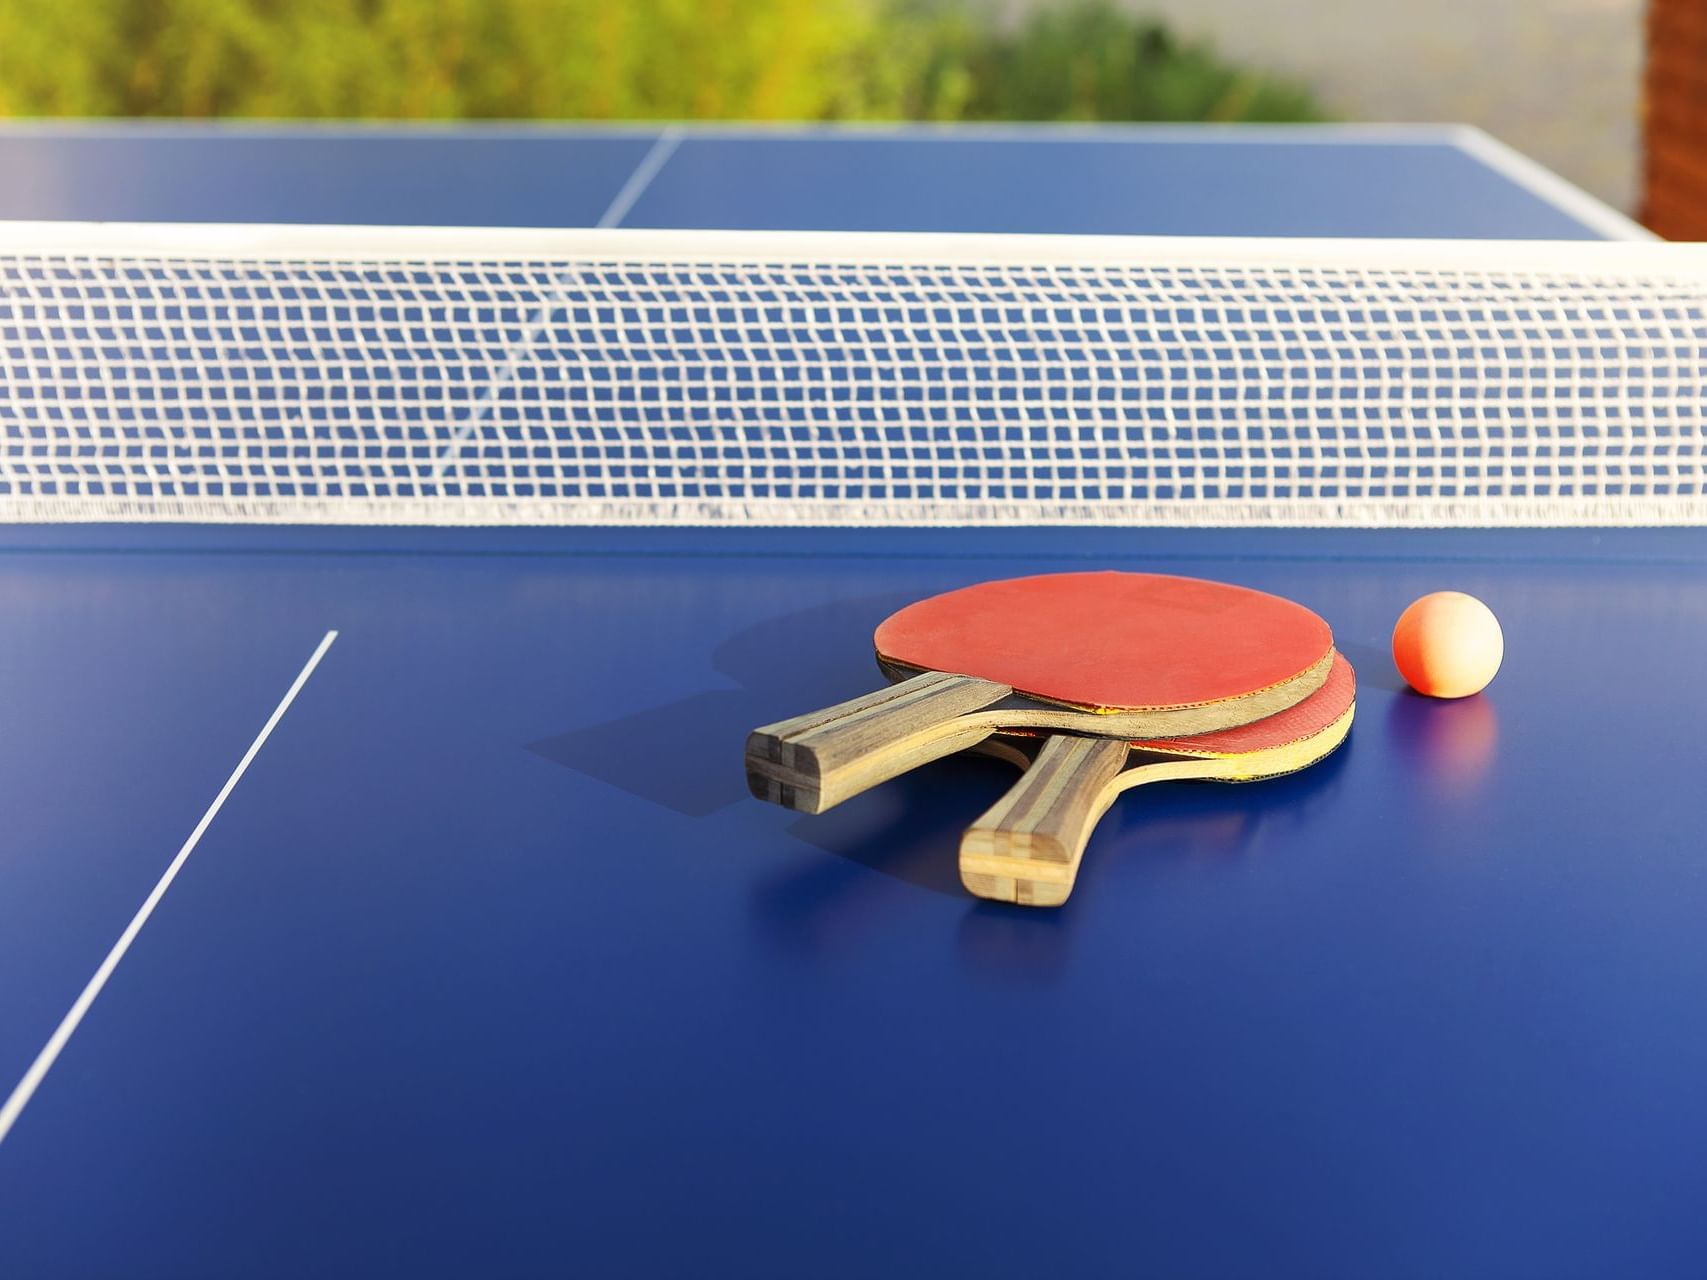 Table tennis racket & ball on blue table at Southern Palms Club